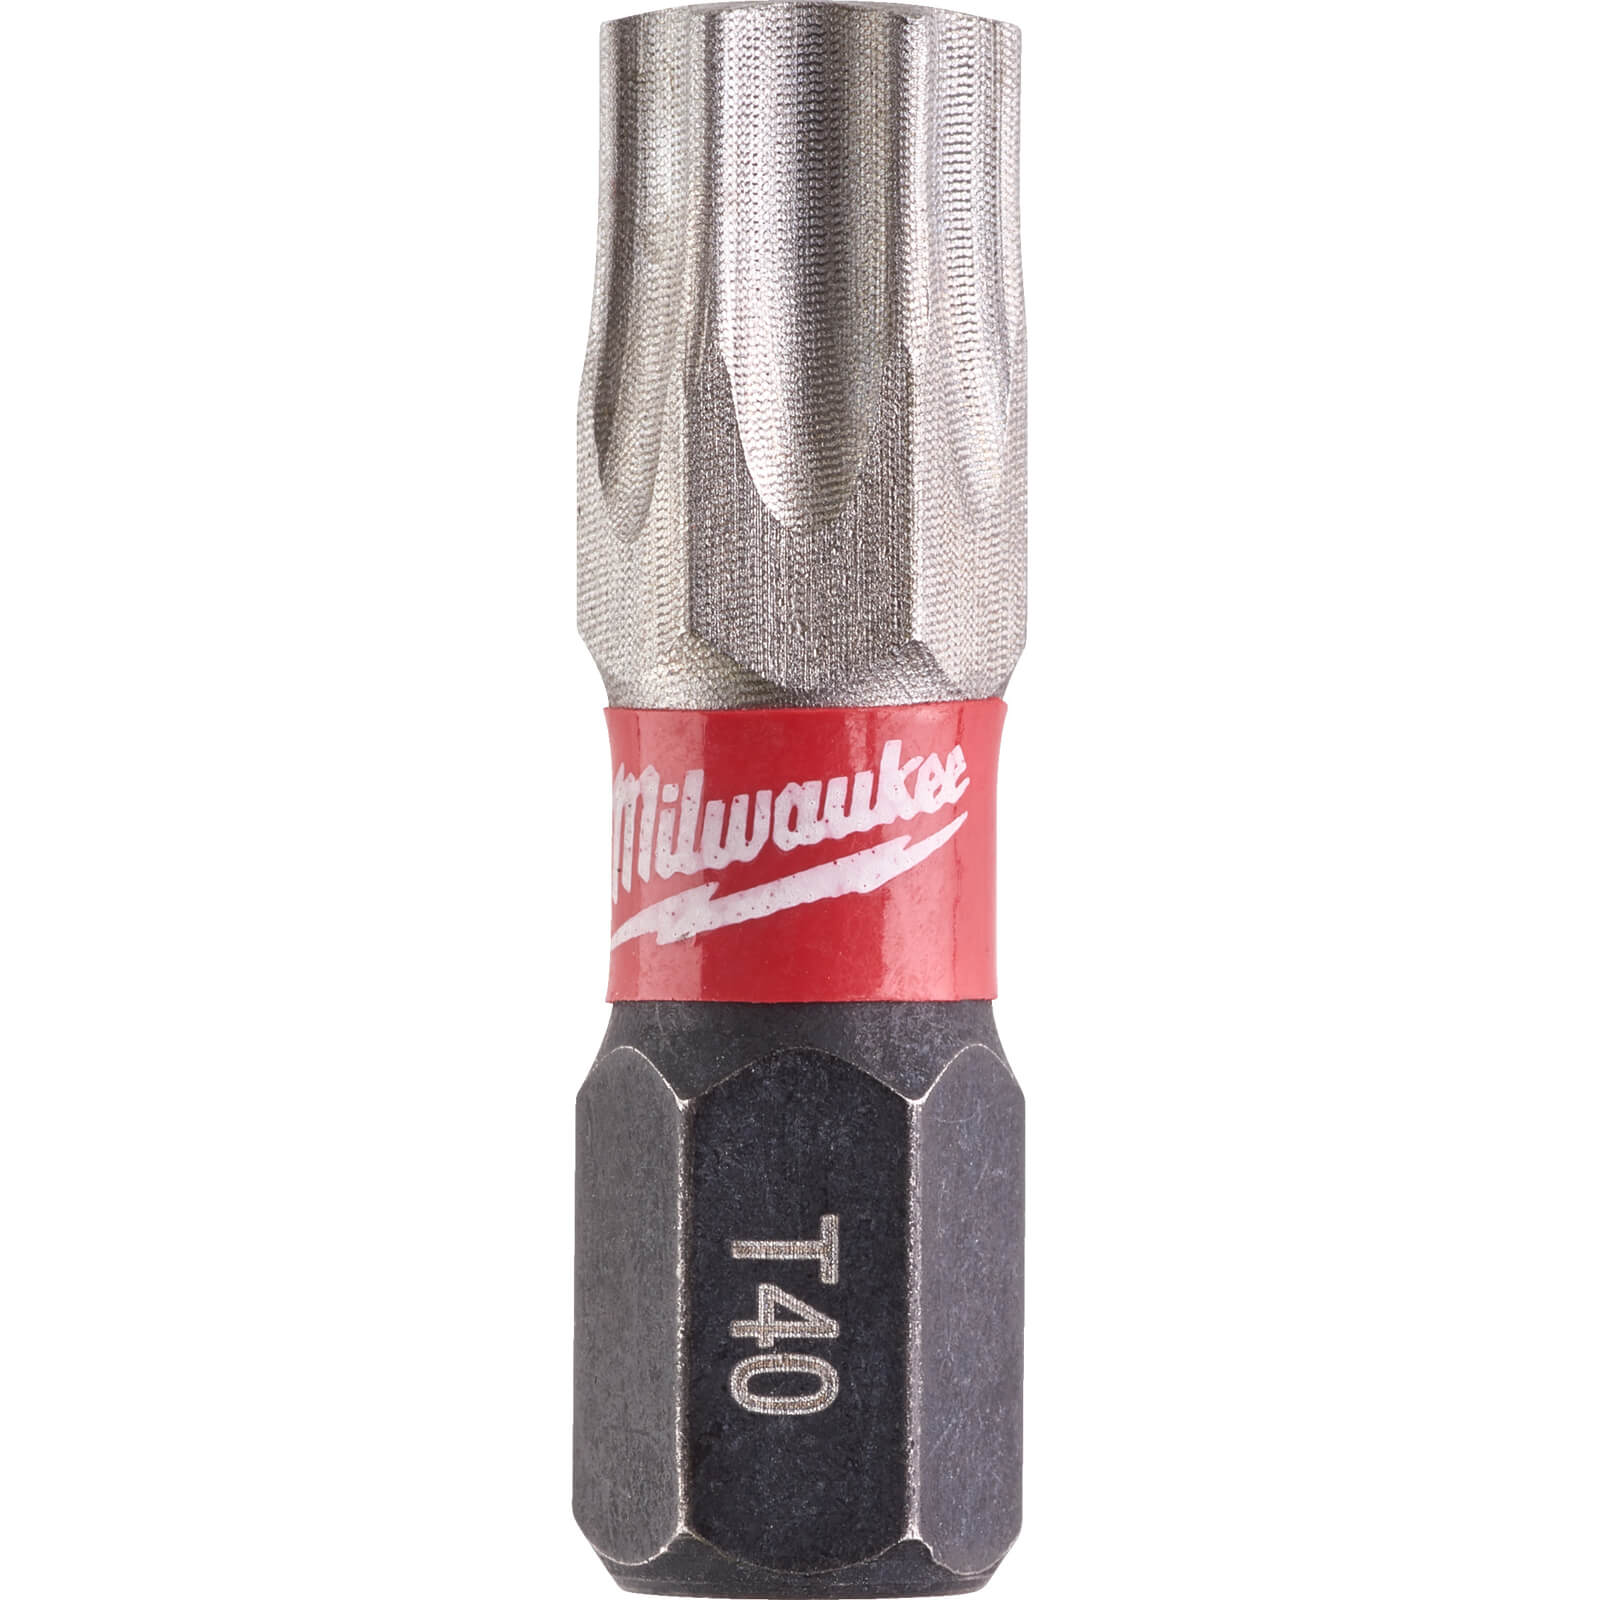 Image of Milwaukee Shockwave Impact Duty Security Torx Screwdriver Bits TX BO40 25mm Pack of 2